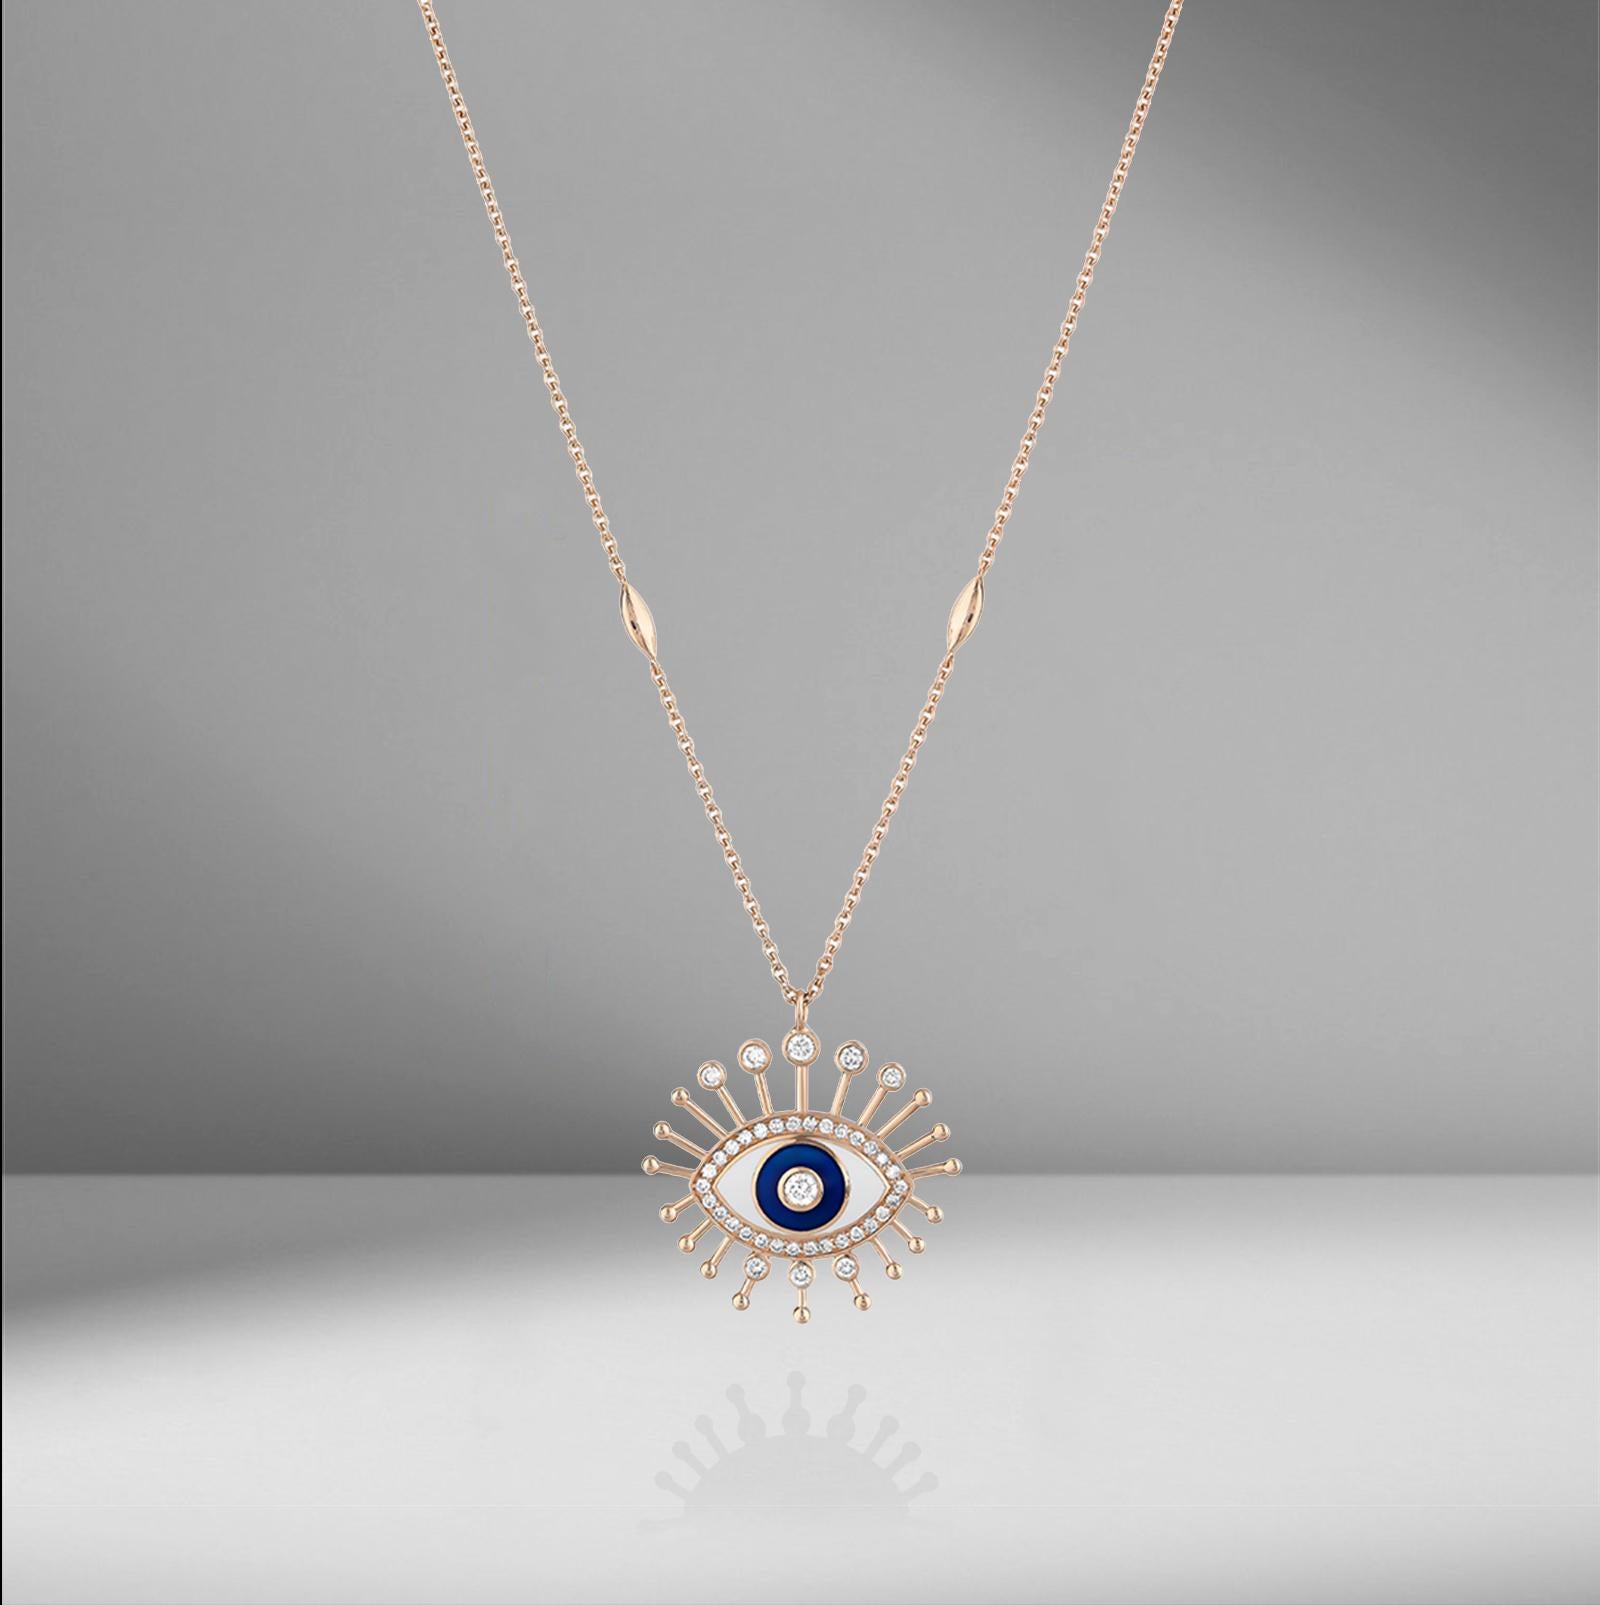 Keep Your Eye On Elegance With This Breathtaking Round-Cut Diamond Enamel Evil Eye Pendant Necklace By Nazarliqe Talisman Jewelry Specialist.

A Gift With Meaning

The Necklace features 0.70ctw Round Diamonds 
E Color 
VS Clarity 
18 Karat Rose Gold